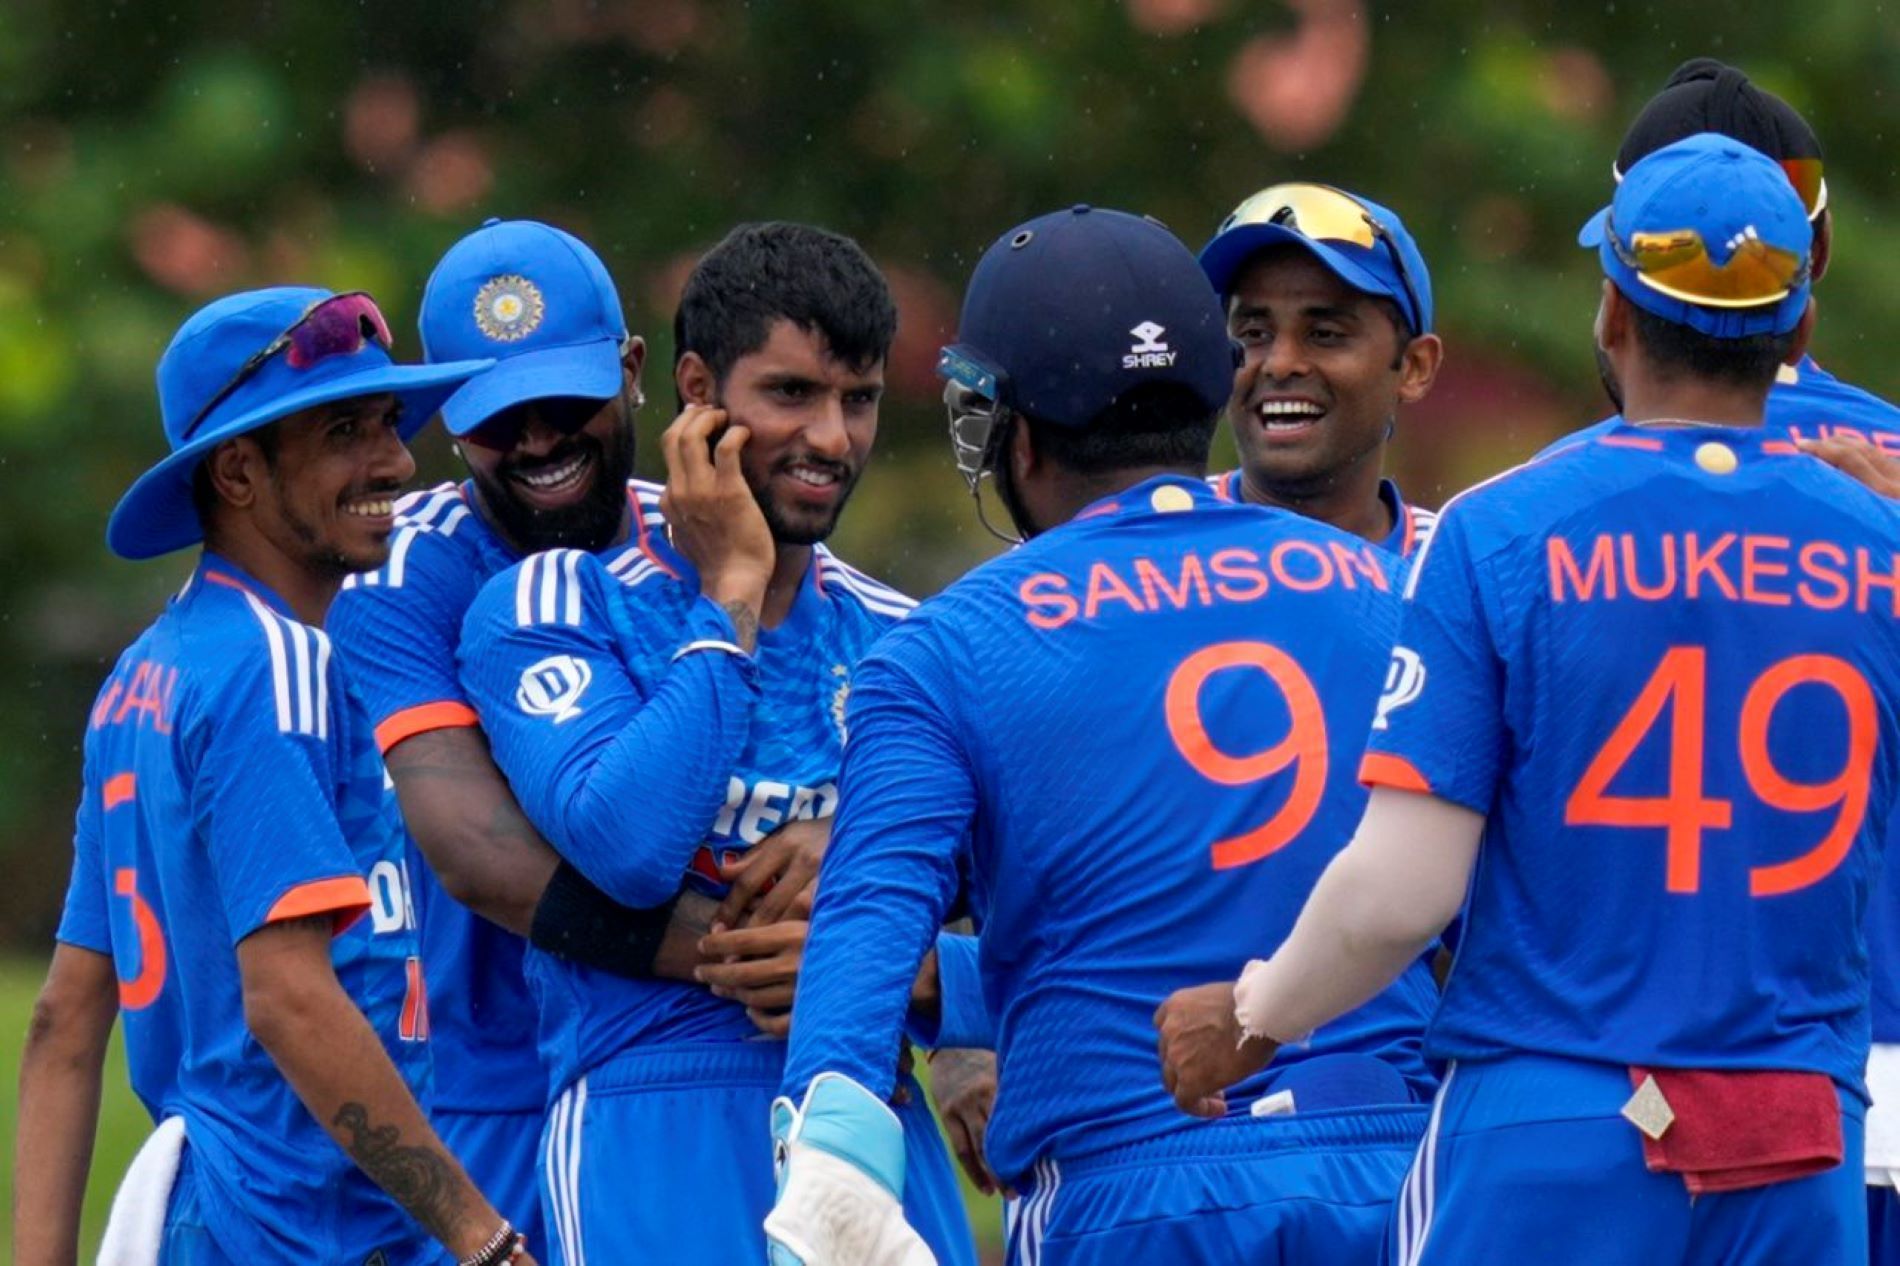 Team India suffered a shocking defeat in the T20I series against West Indies